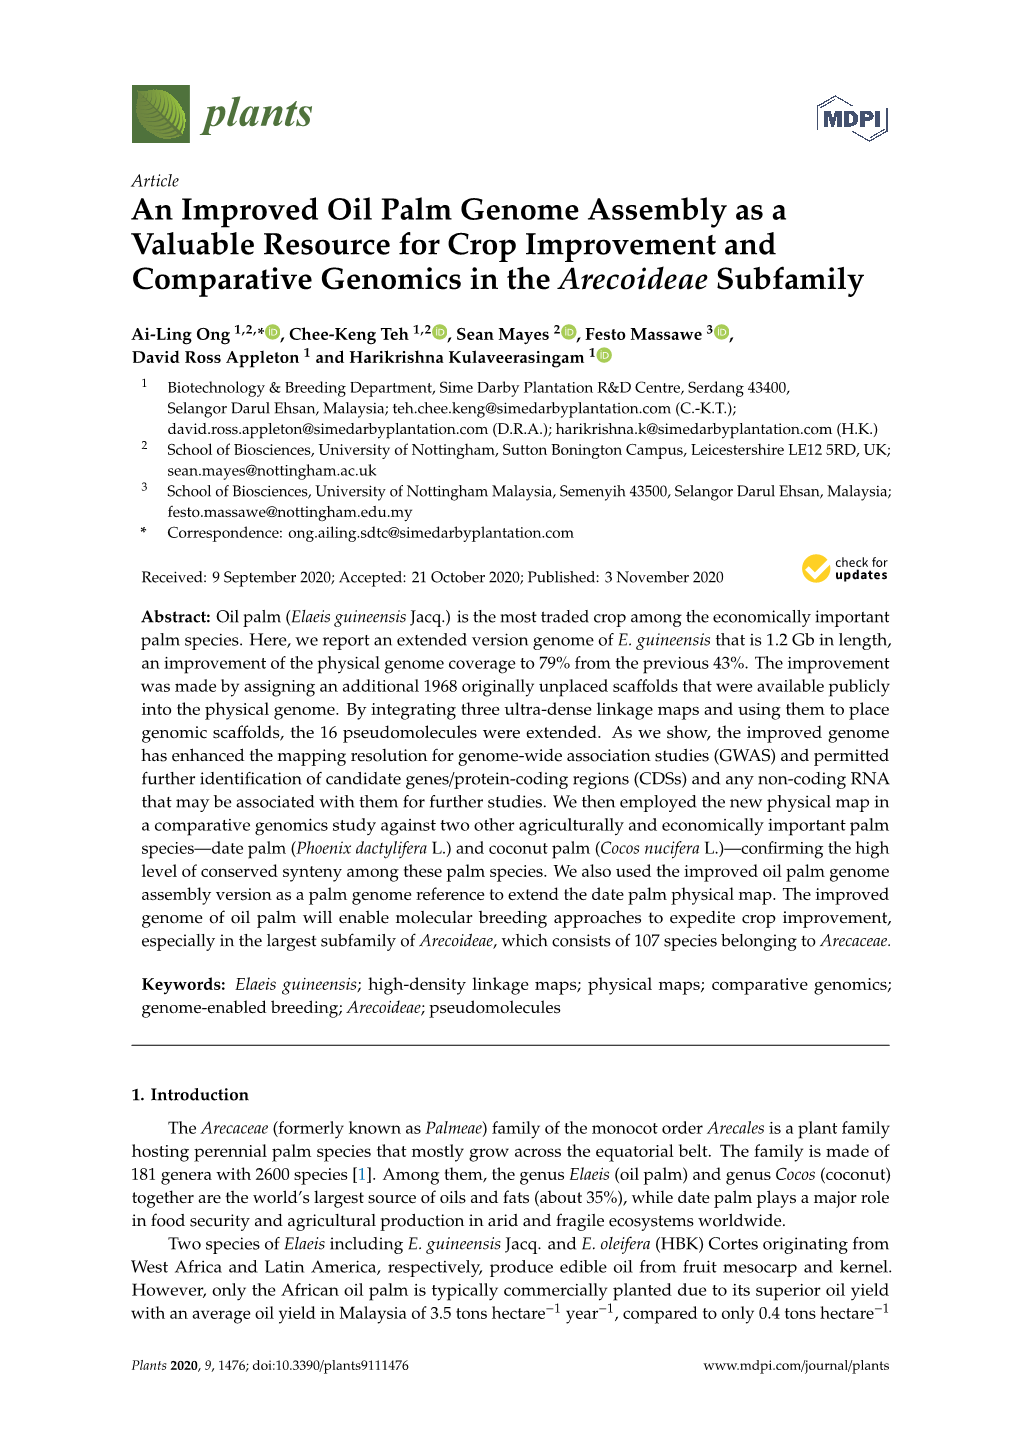 An Improved Oil Palm Genome Assembly As a Valuable Resource for Crop Improvement and Comparative Genomics in the Arecoideae Subfamily